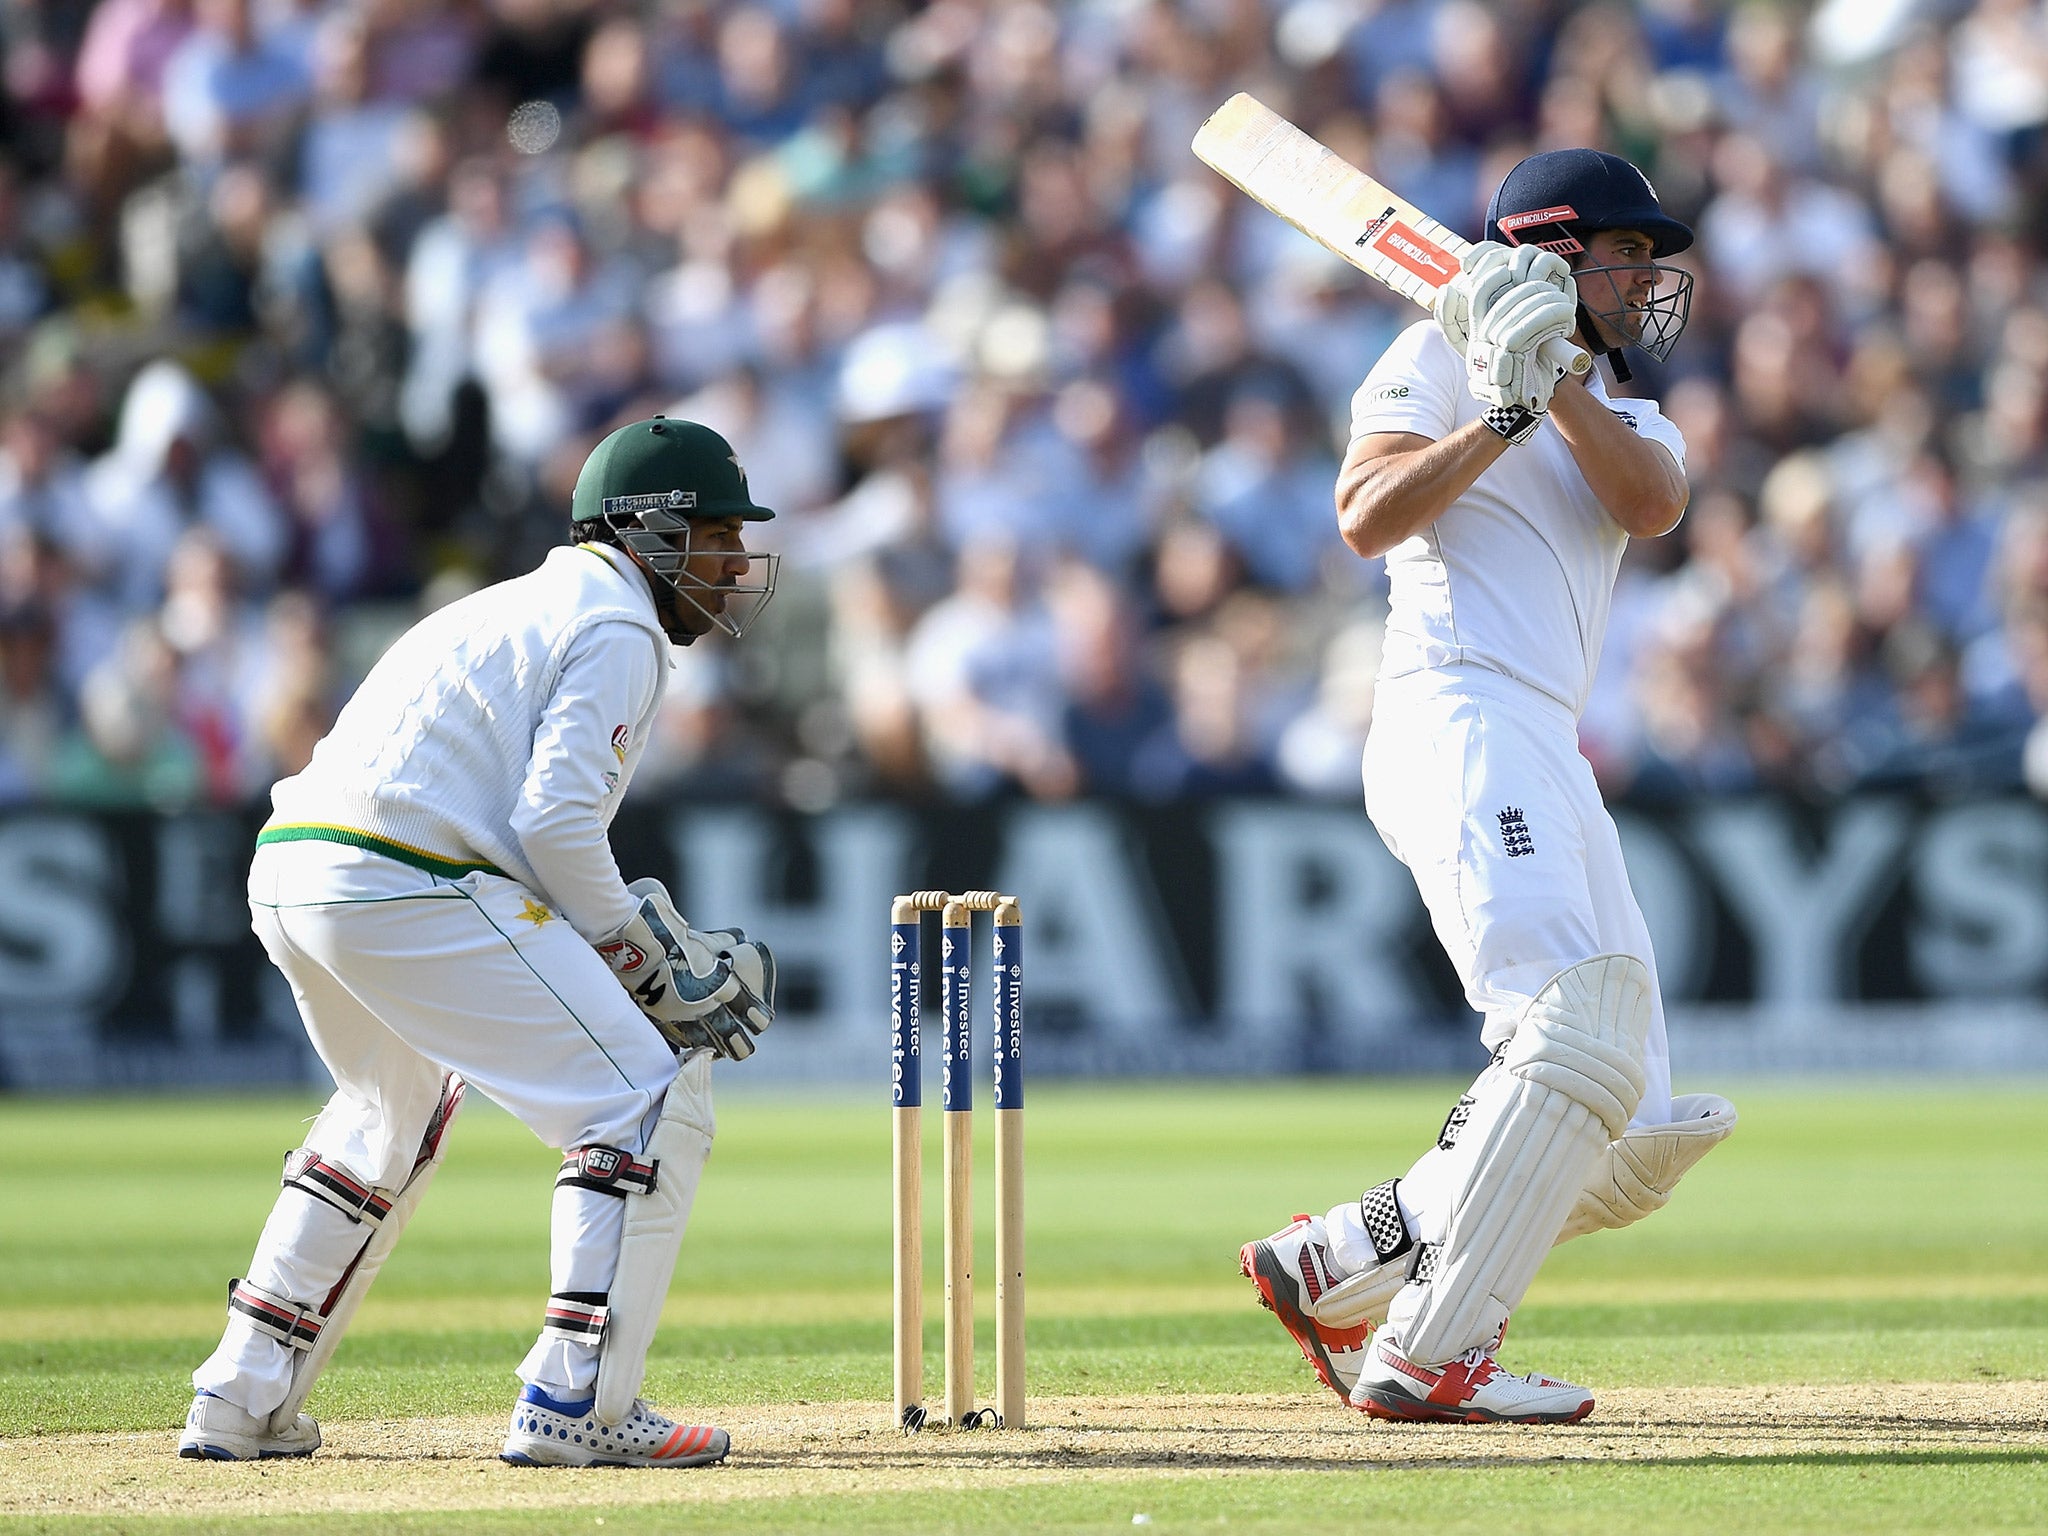 Alastair Cook finished the day unbeaten on 64 as England fought back